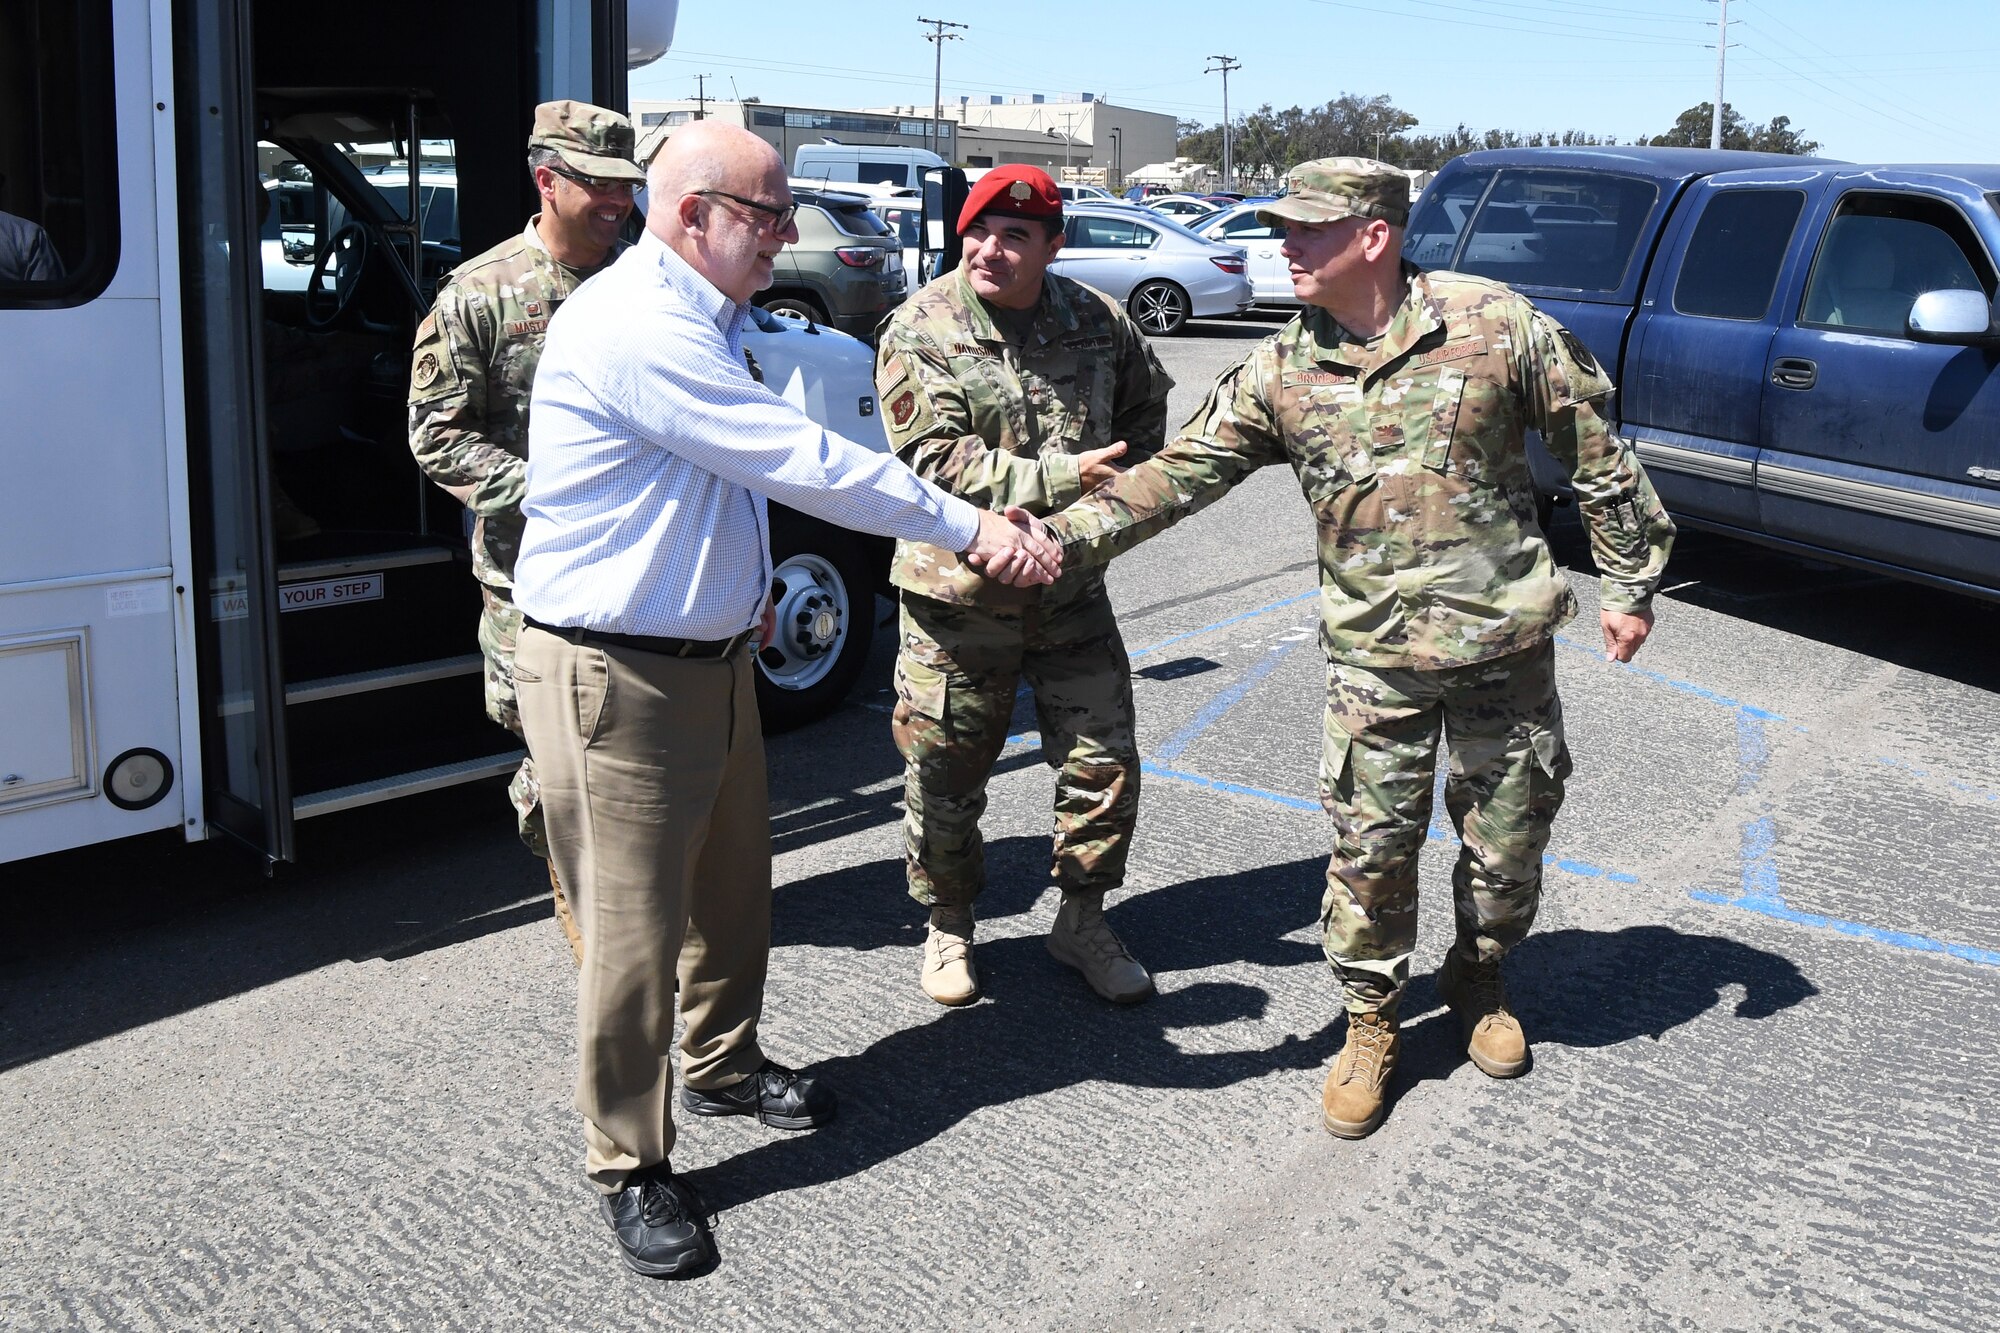 John Roth, performing the duties of the Under Secretary of the Air Force (left), is greeted by Col. Scott Brodeur, Combined Space Operations Center (CSpOC) director (right), and Brig. Gen. Matthew Davidson, 14th Air Force vice commander (center), during a visit at Vandenberg AFB, Calif., Aug. 27, 2019